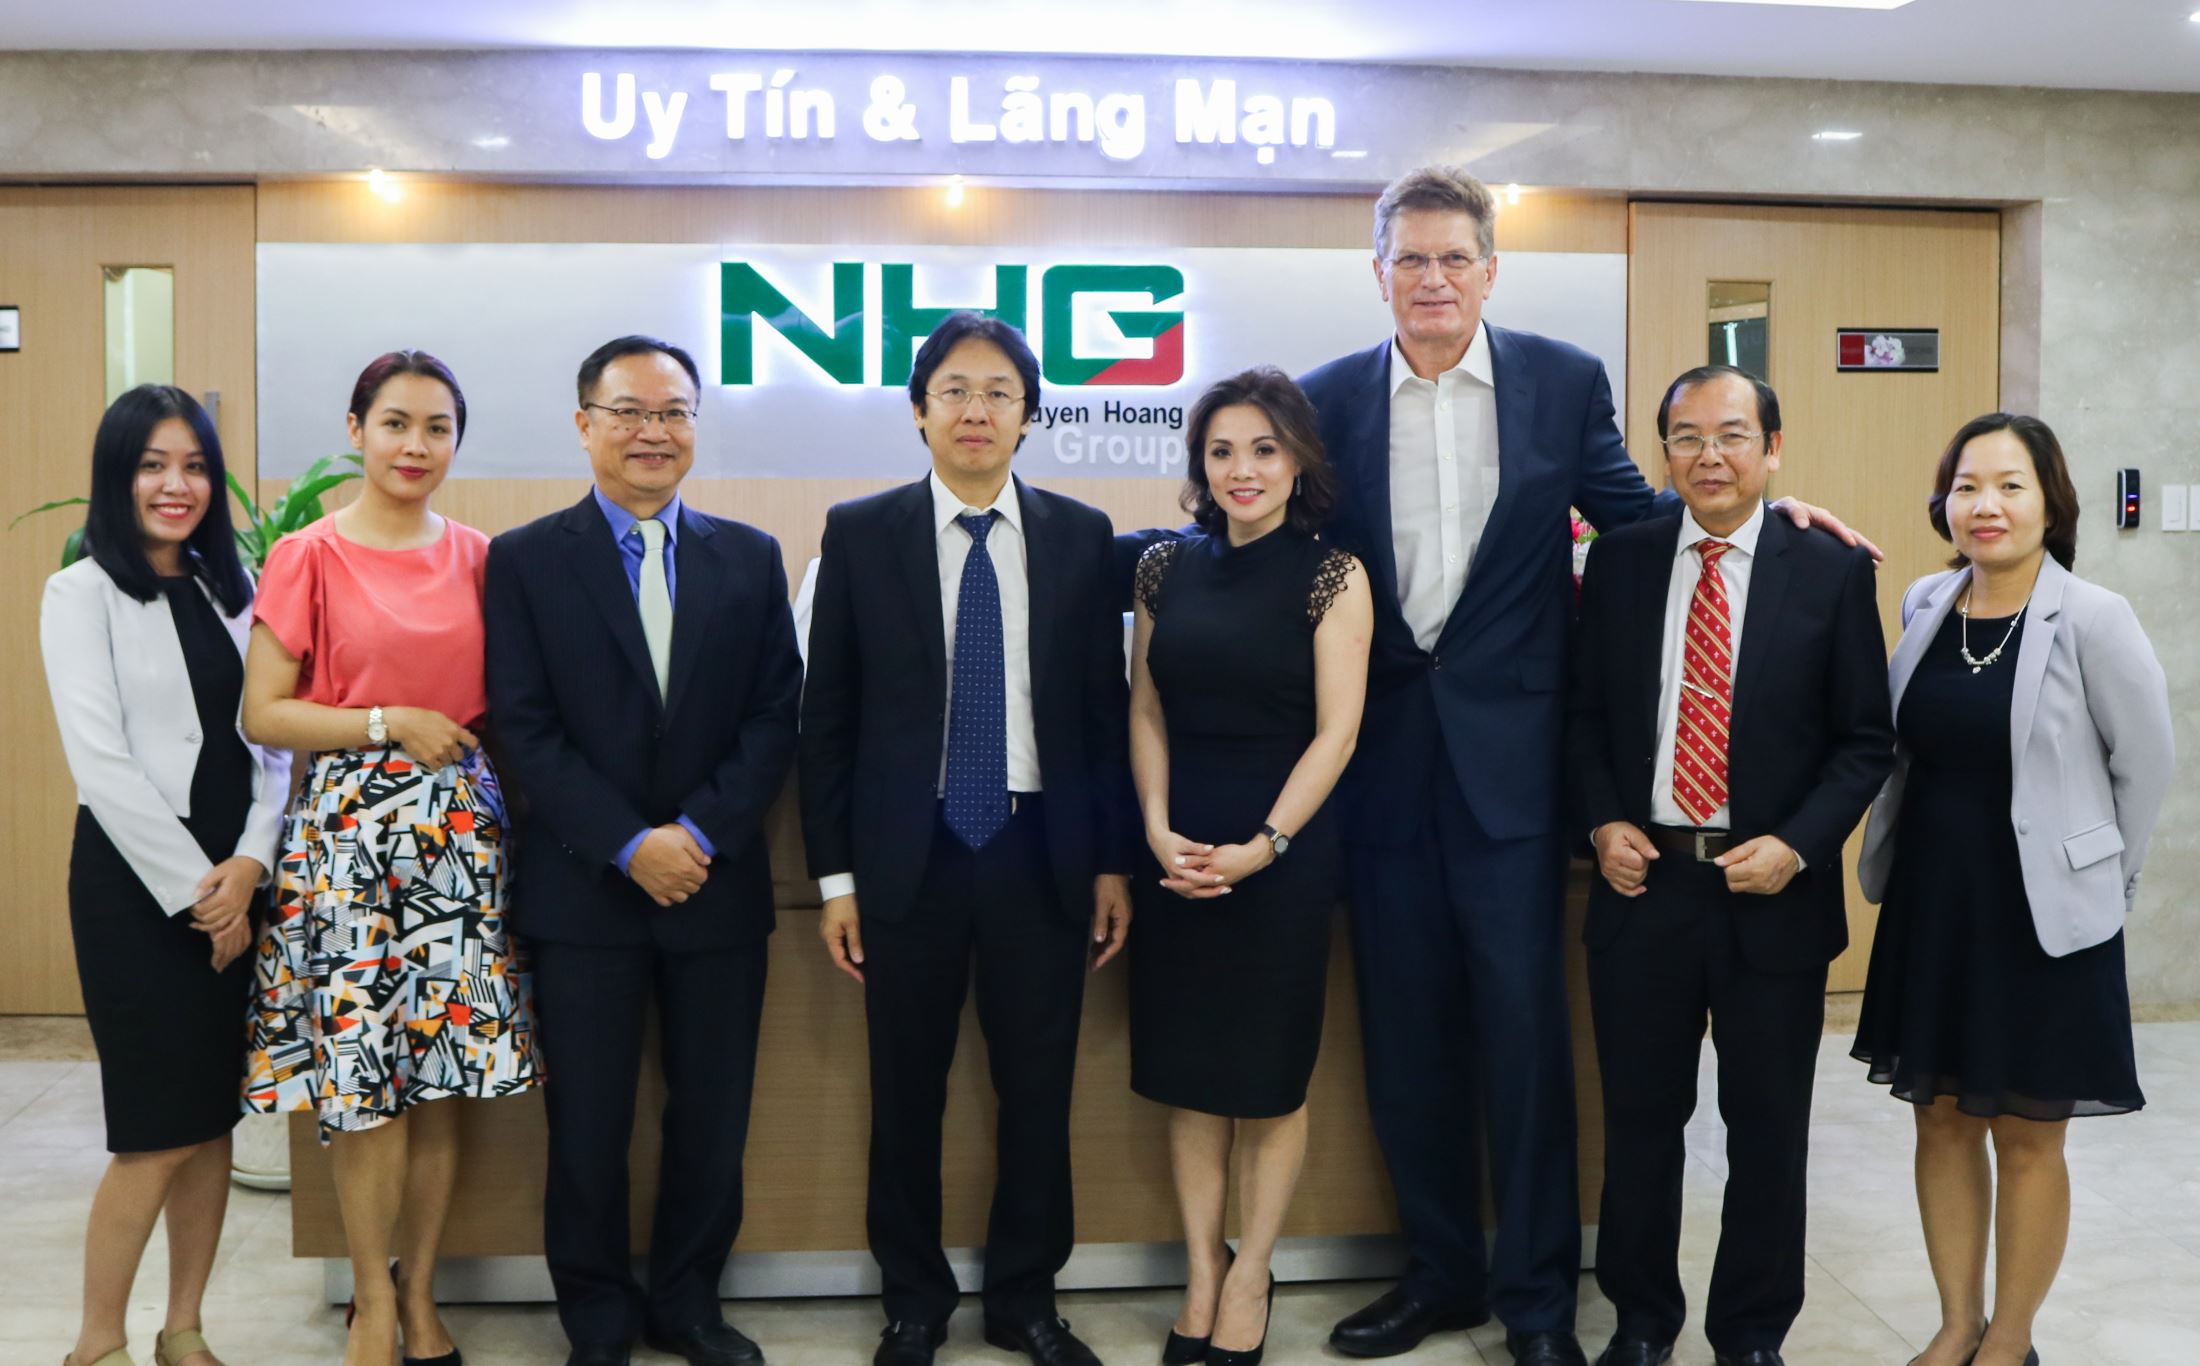 NHG president - Mr. Hoang Quoc Viet and Mr. The Hon Ted Baillieu took picture after the meeting at NHG headquarter